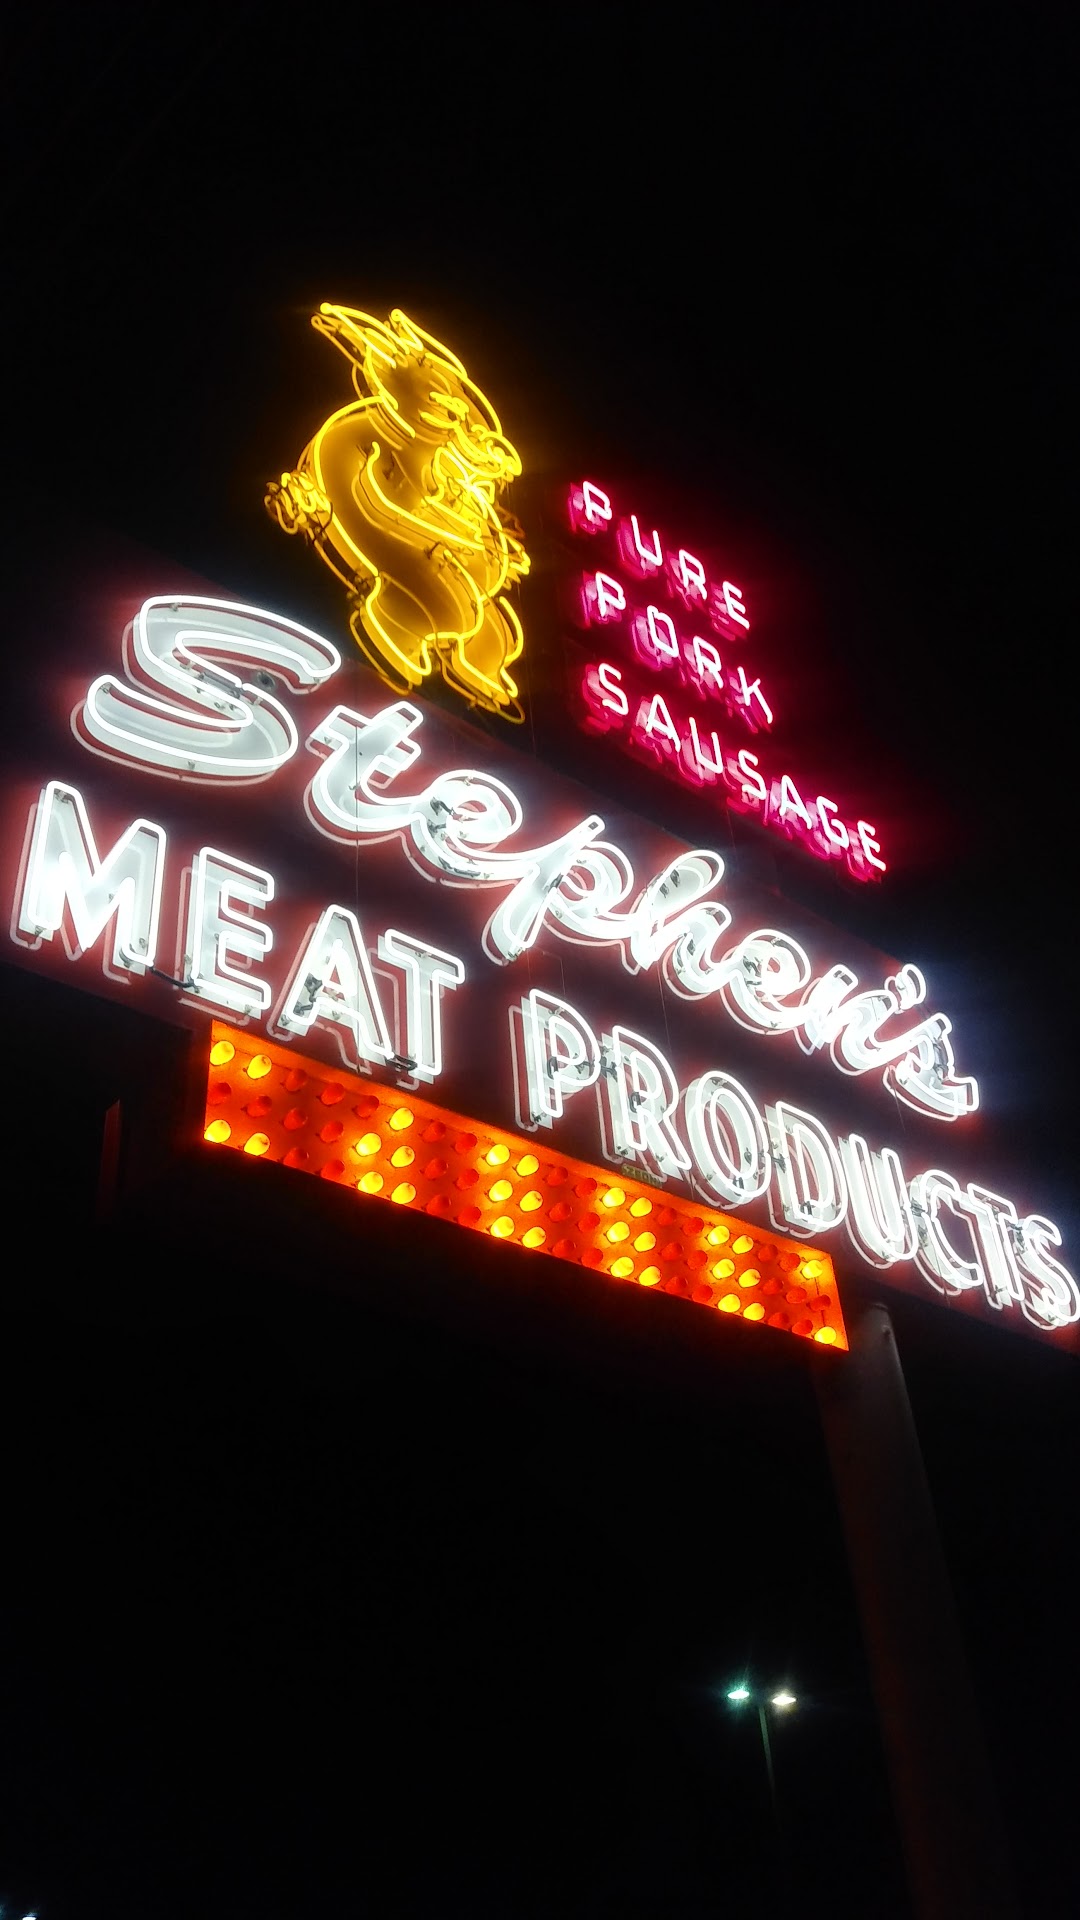 Dancing Pig - Stephans Meat Products